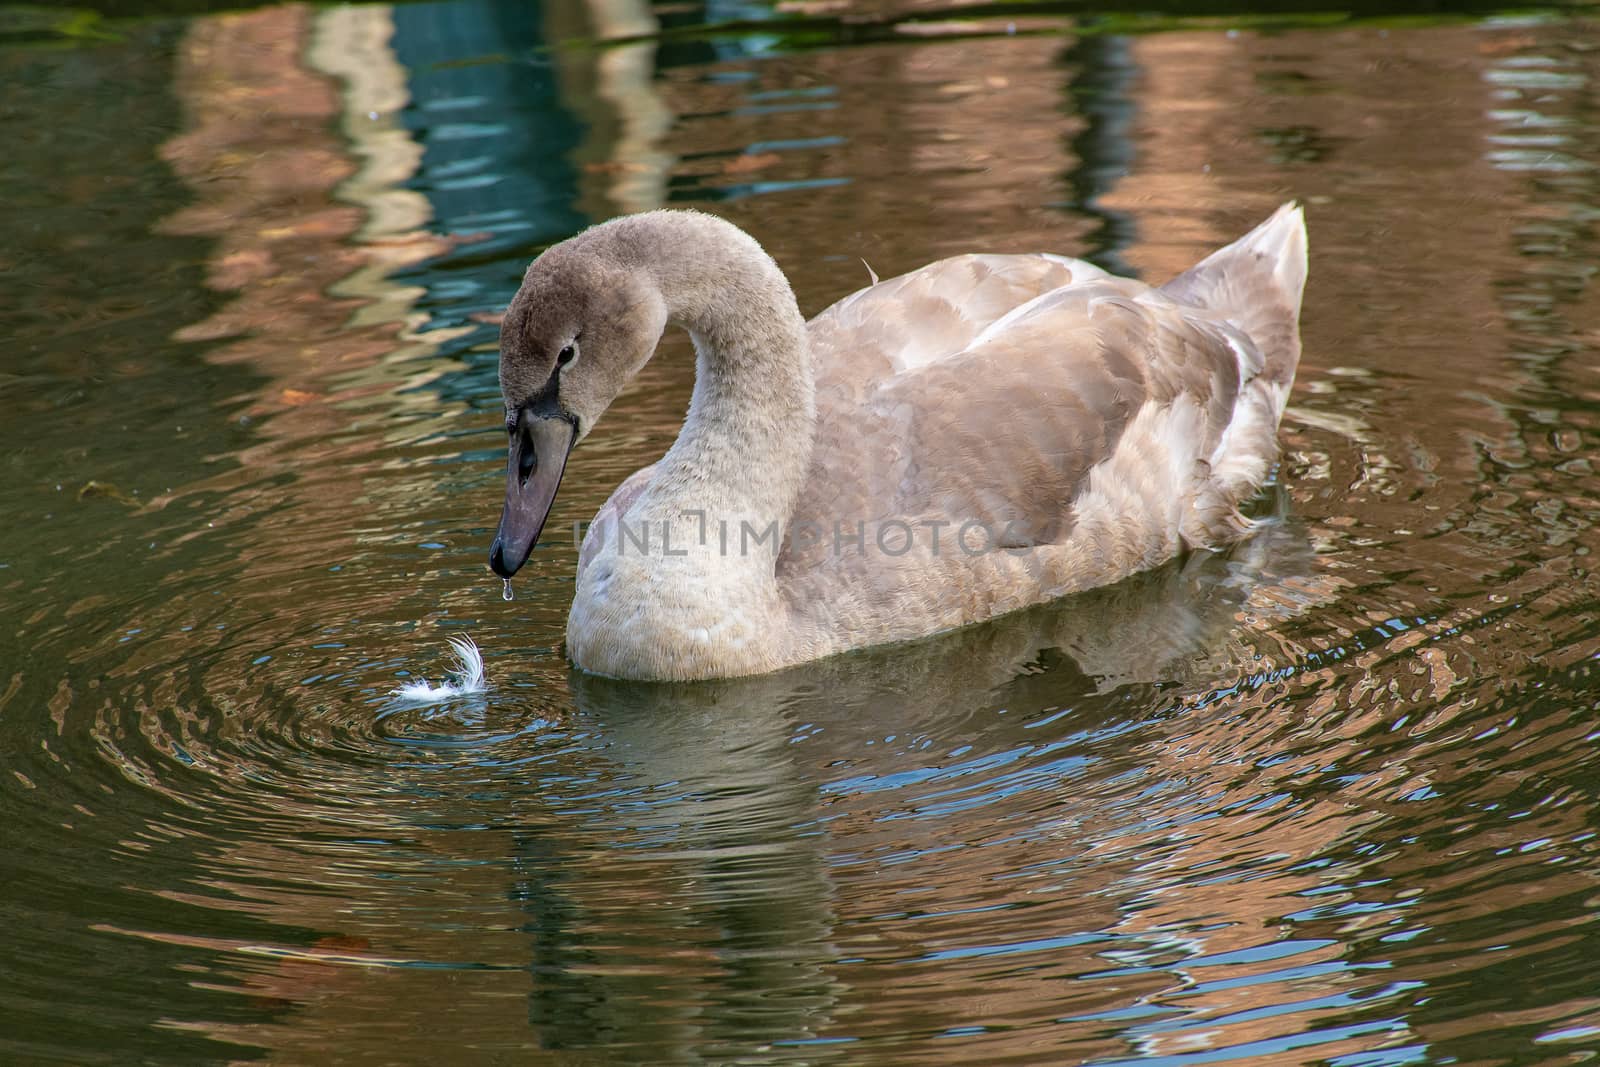 Young cygnet swans just about to lose their baby gray feathers